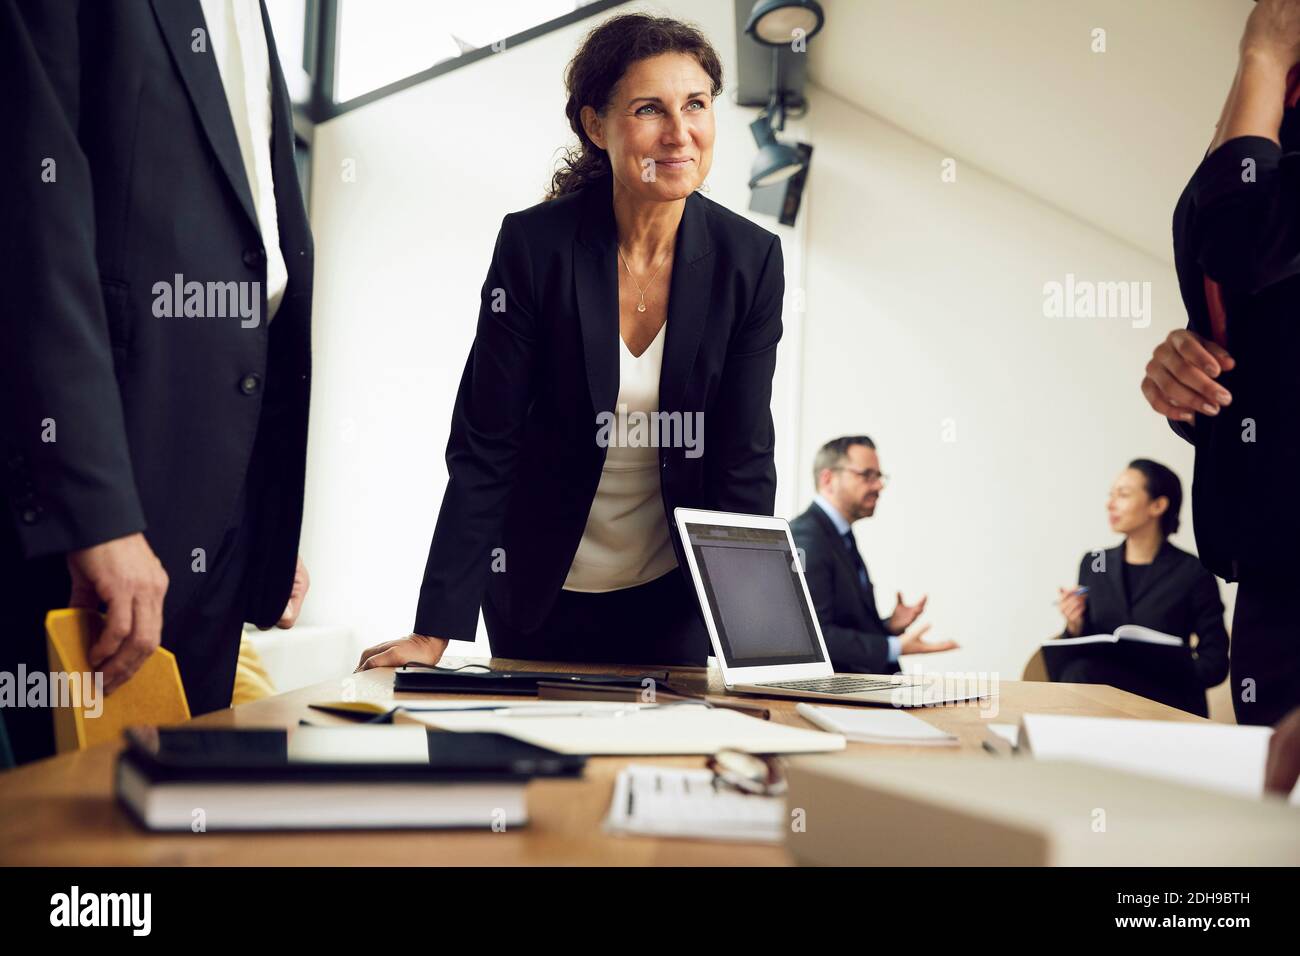 Smiling female professional looking at colleagues during meeting in law firm Stock Photo